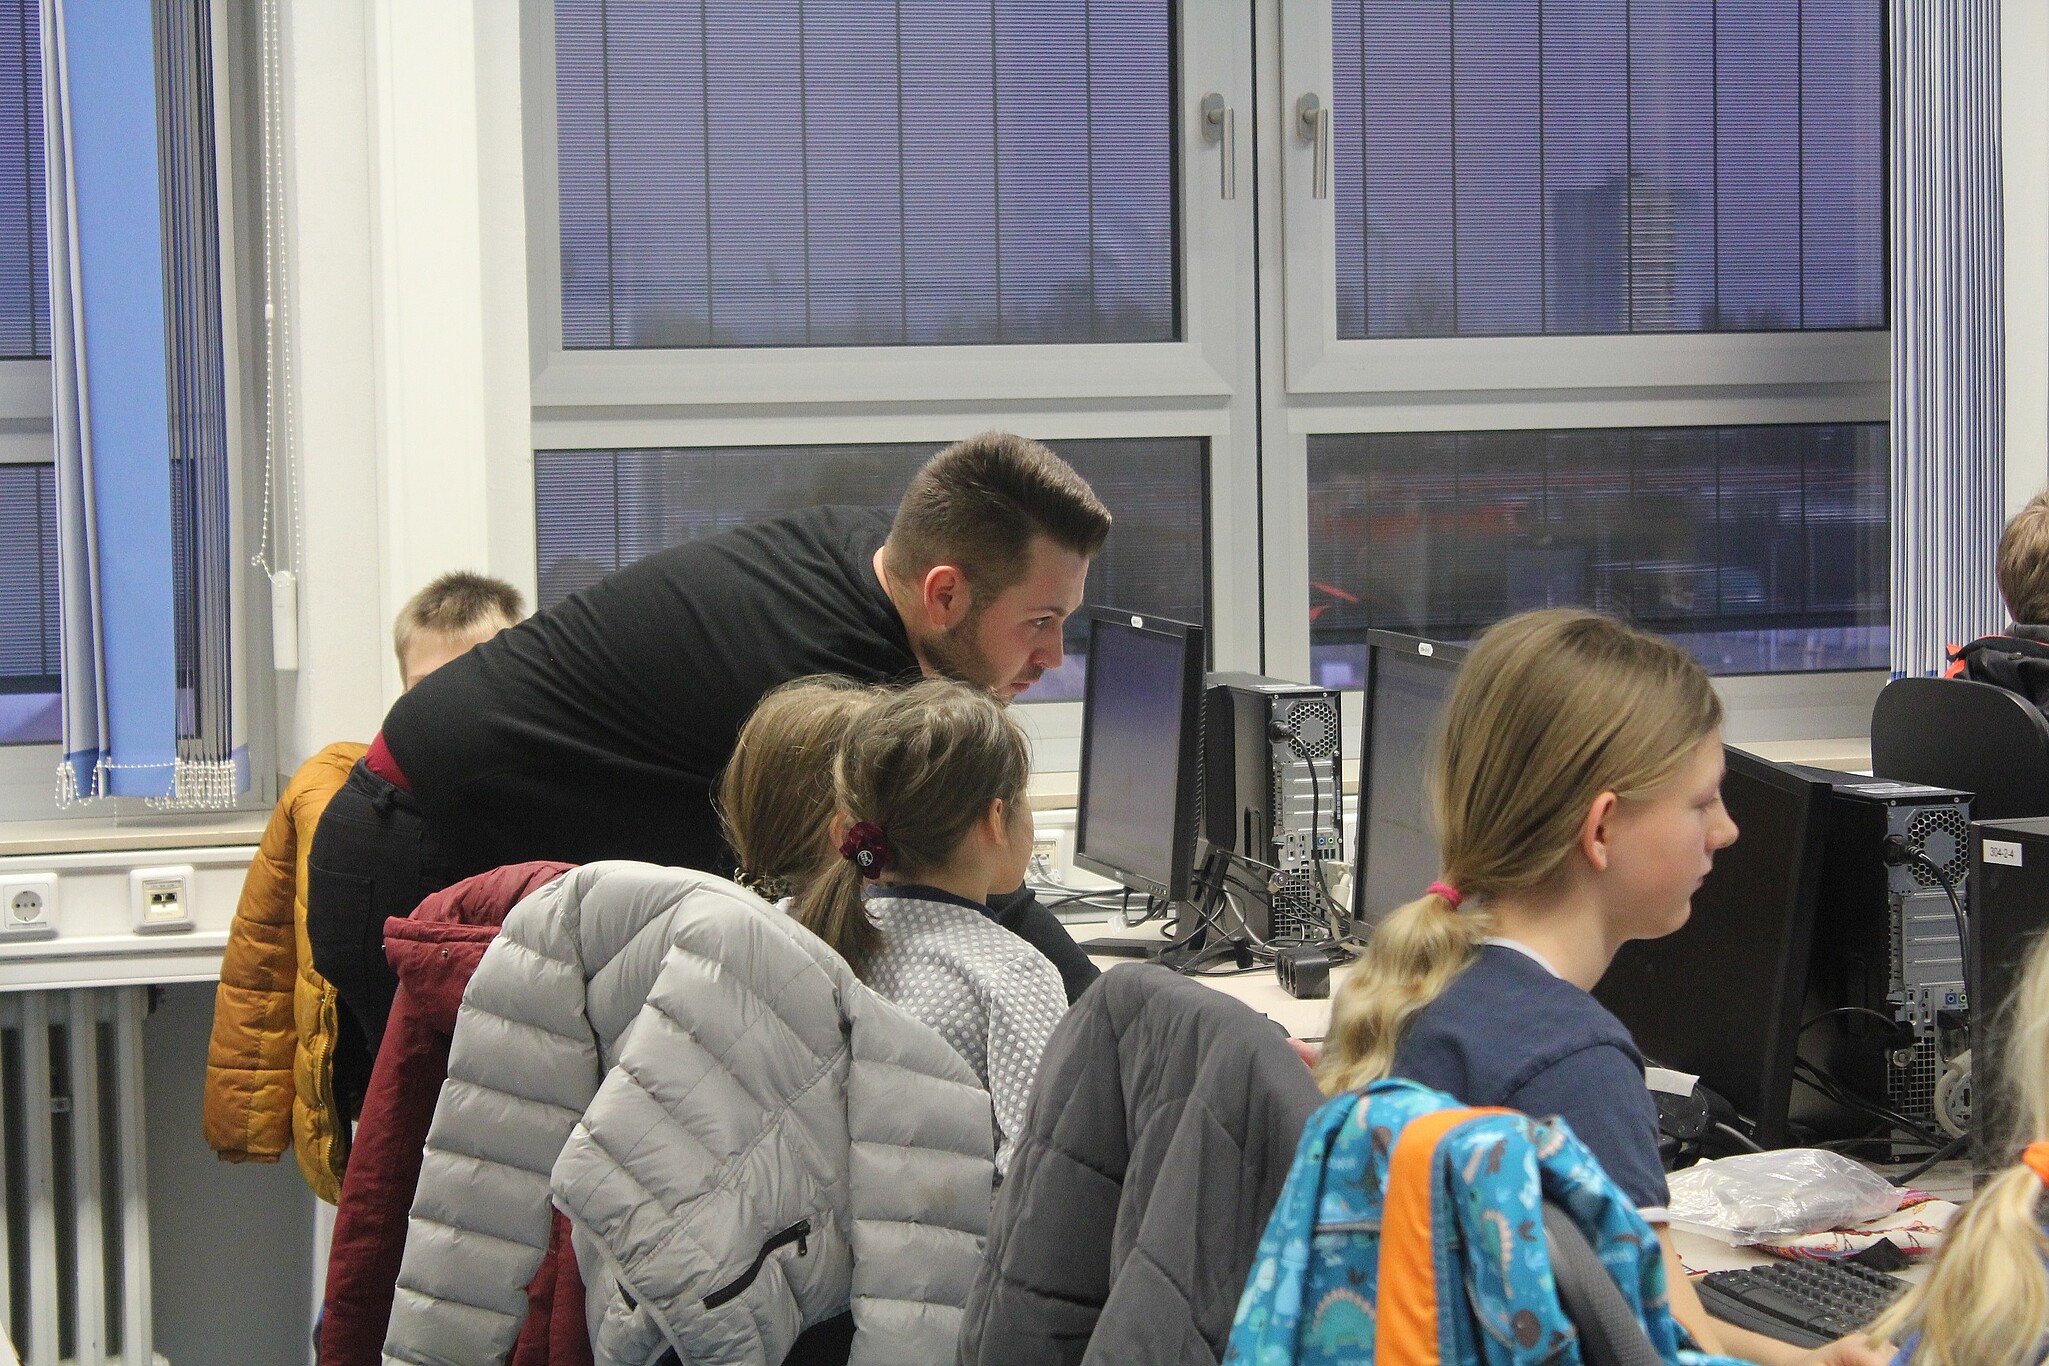 Student helpers support the kids in their first programming attempts (Image: HWG LU)